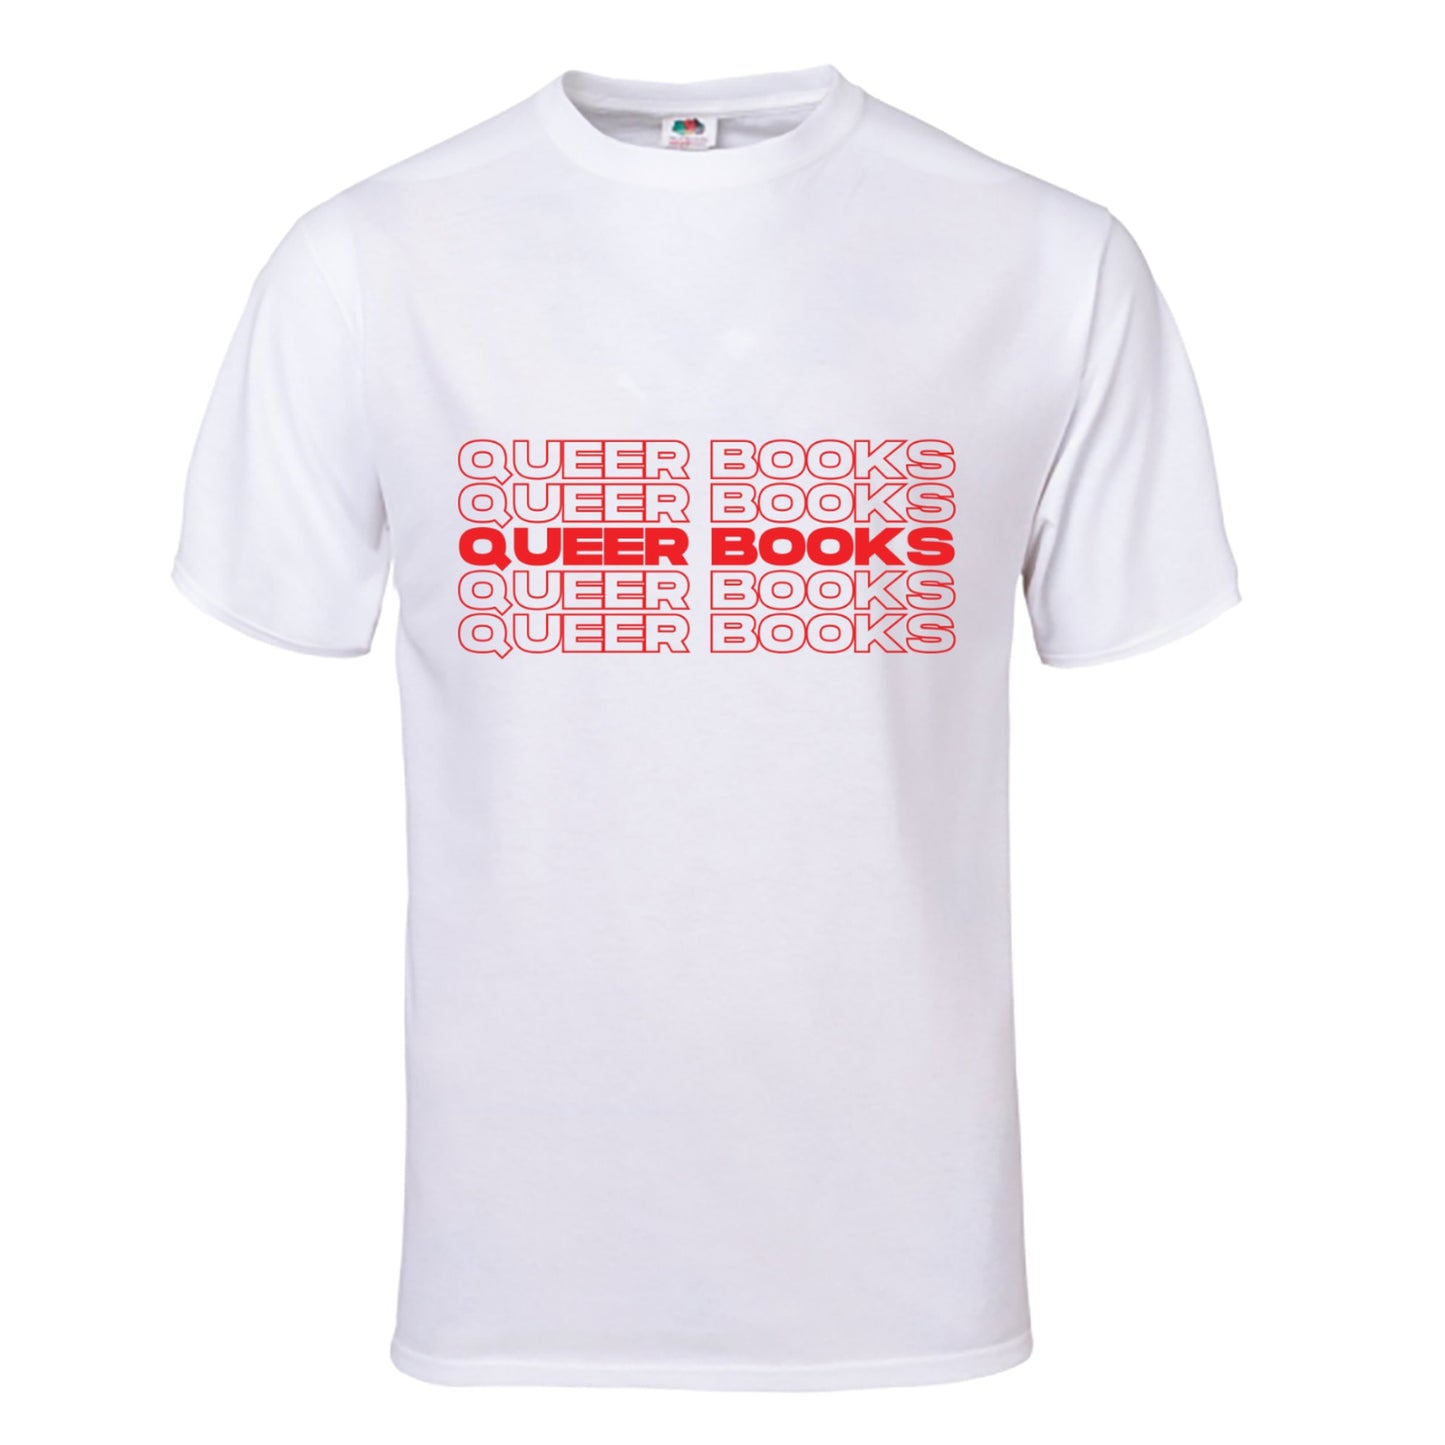 Queer Books Tee